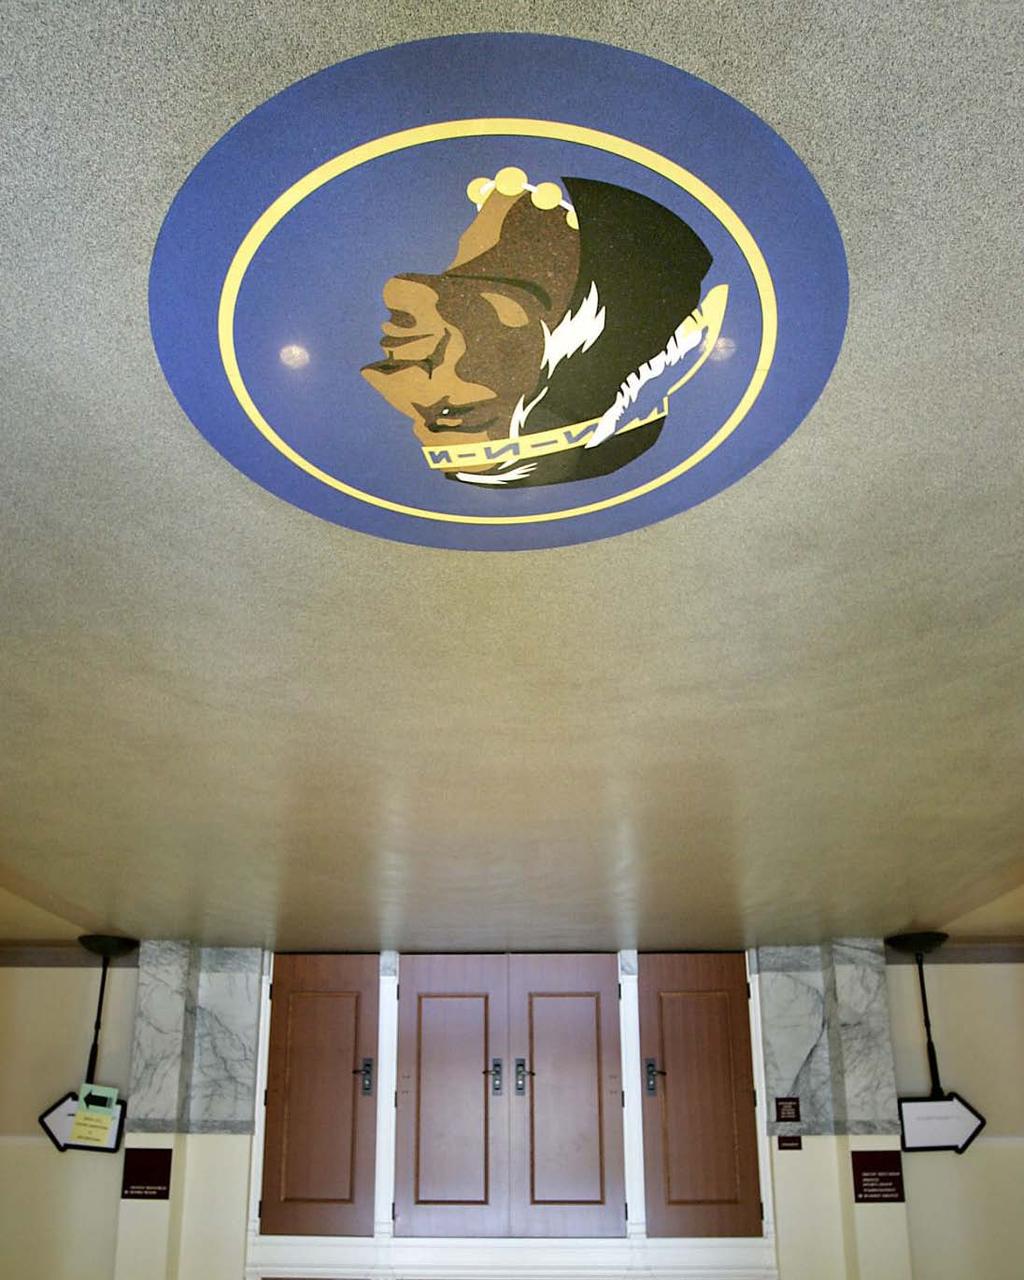 SCHOOLS Activists target Napa High Indians mascot NOEL BRINKERHOFF nbrinkerhoff@americancanyoneagle.com Oct 21, 2015 107 J.L. Sousa, Eagle file photo A replica of the original Napa High School Indian logo is seen in the lobby of the Napa Valley Unified School District auditorium.